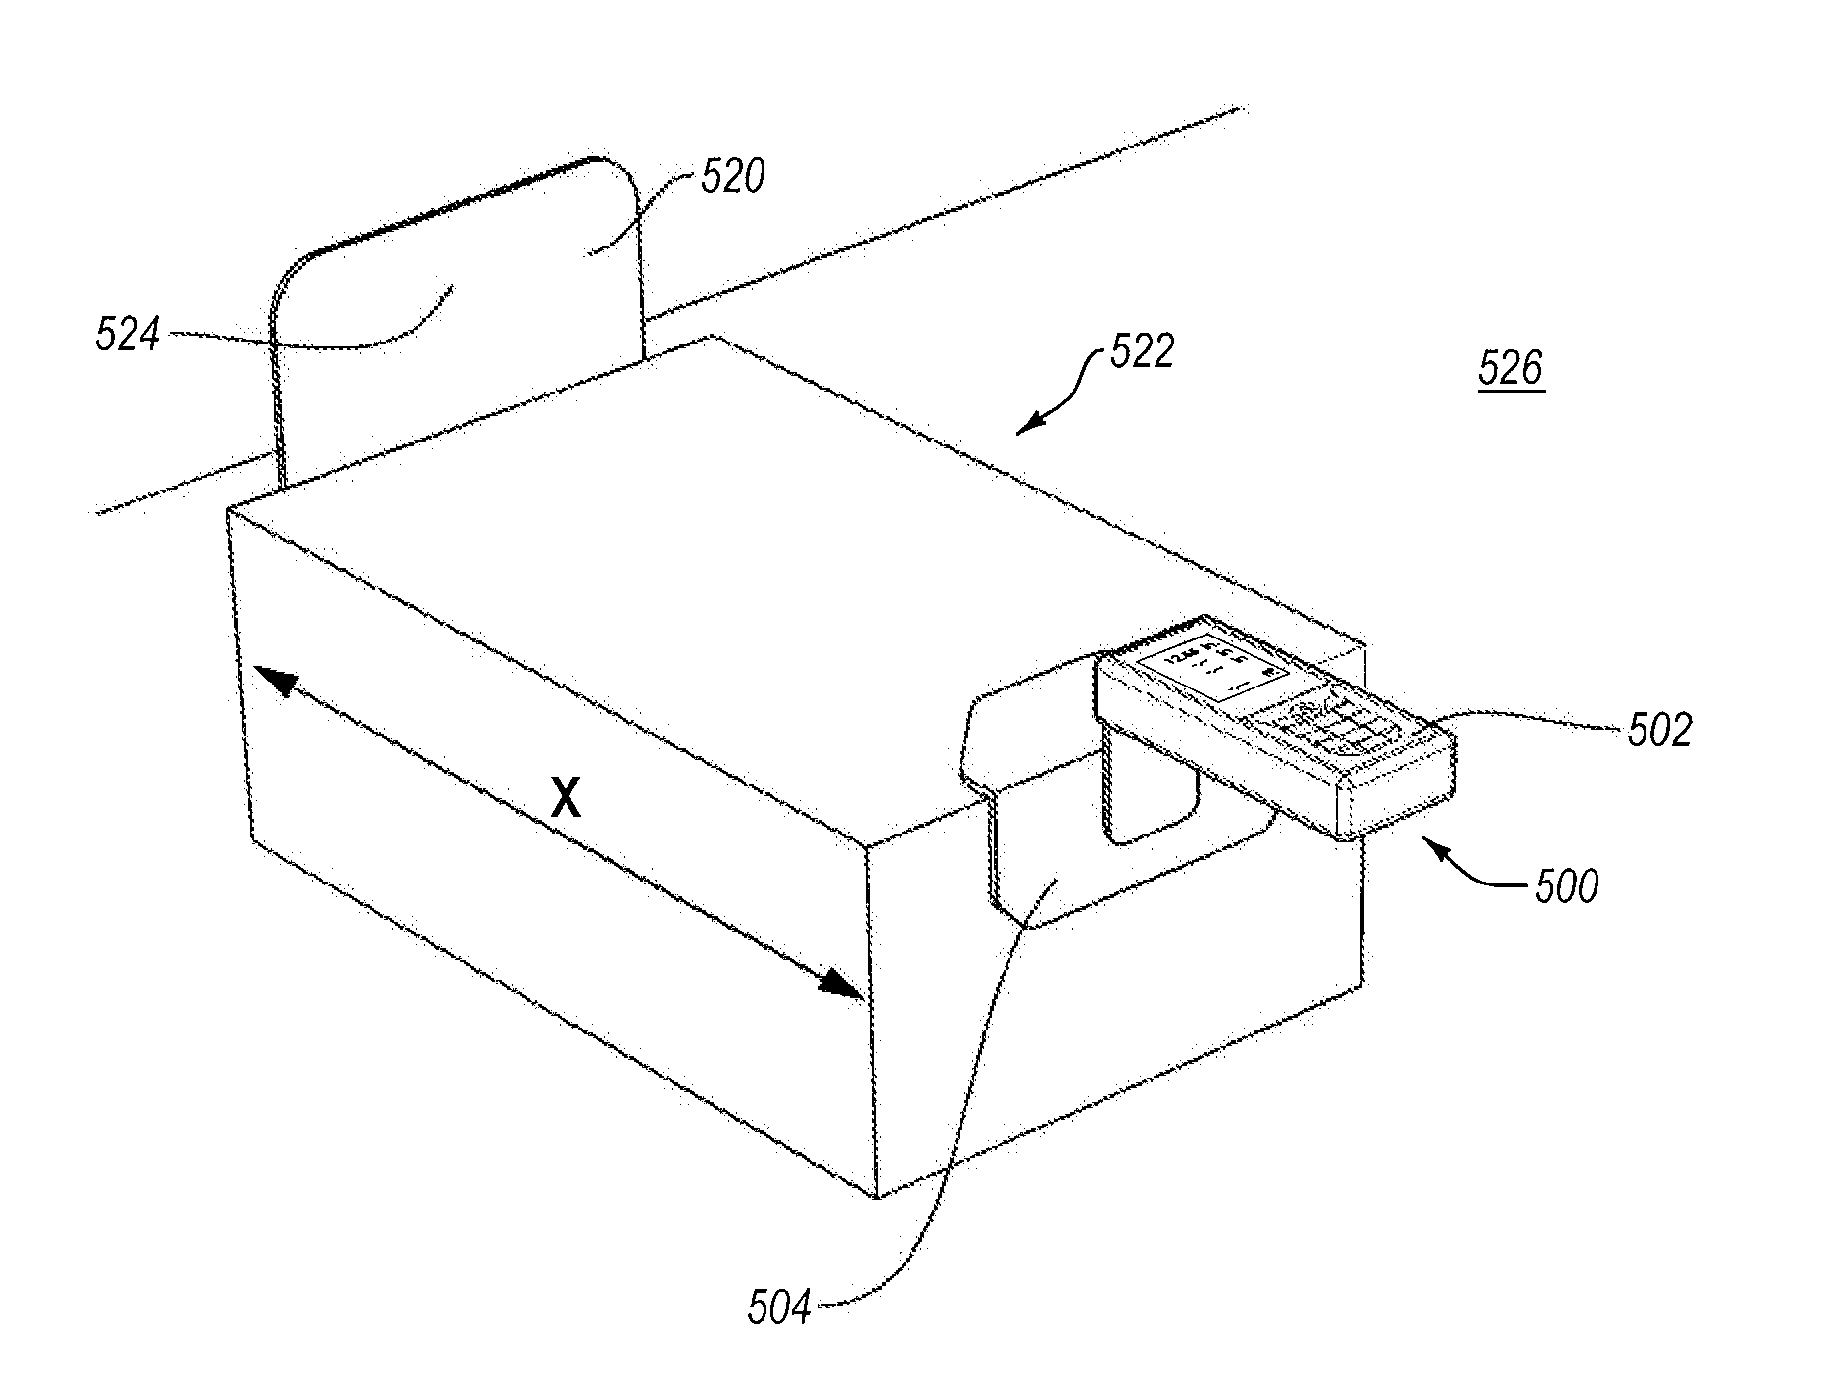 Apparatus, systems and methods for using handheld measurement devices to create on-demand packaging